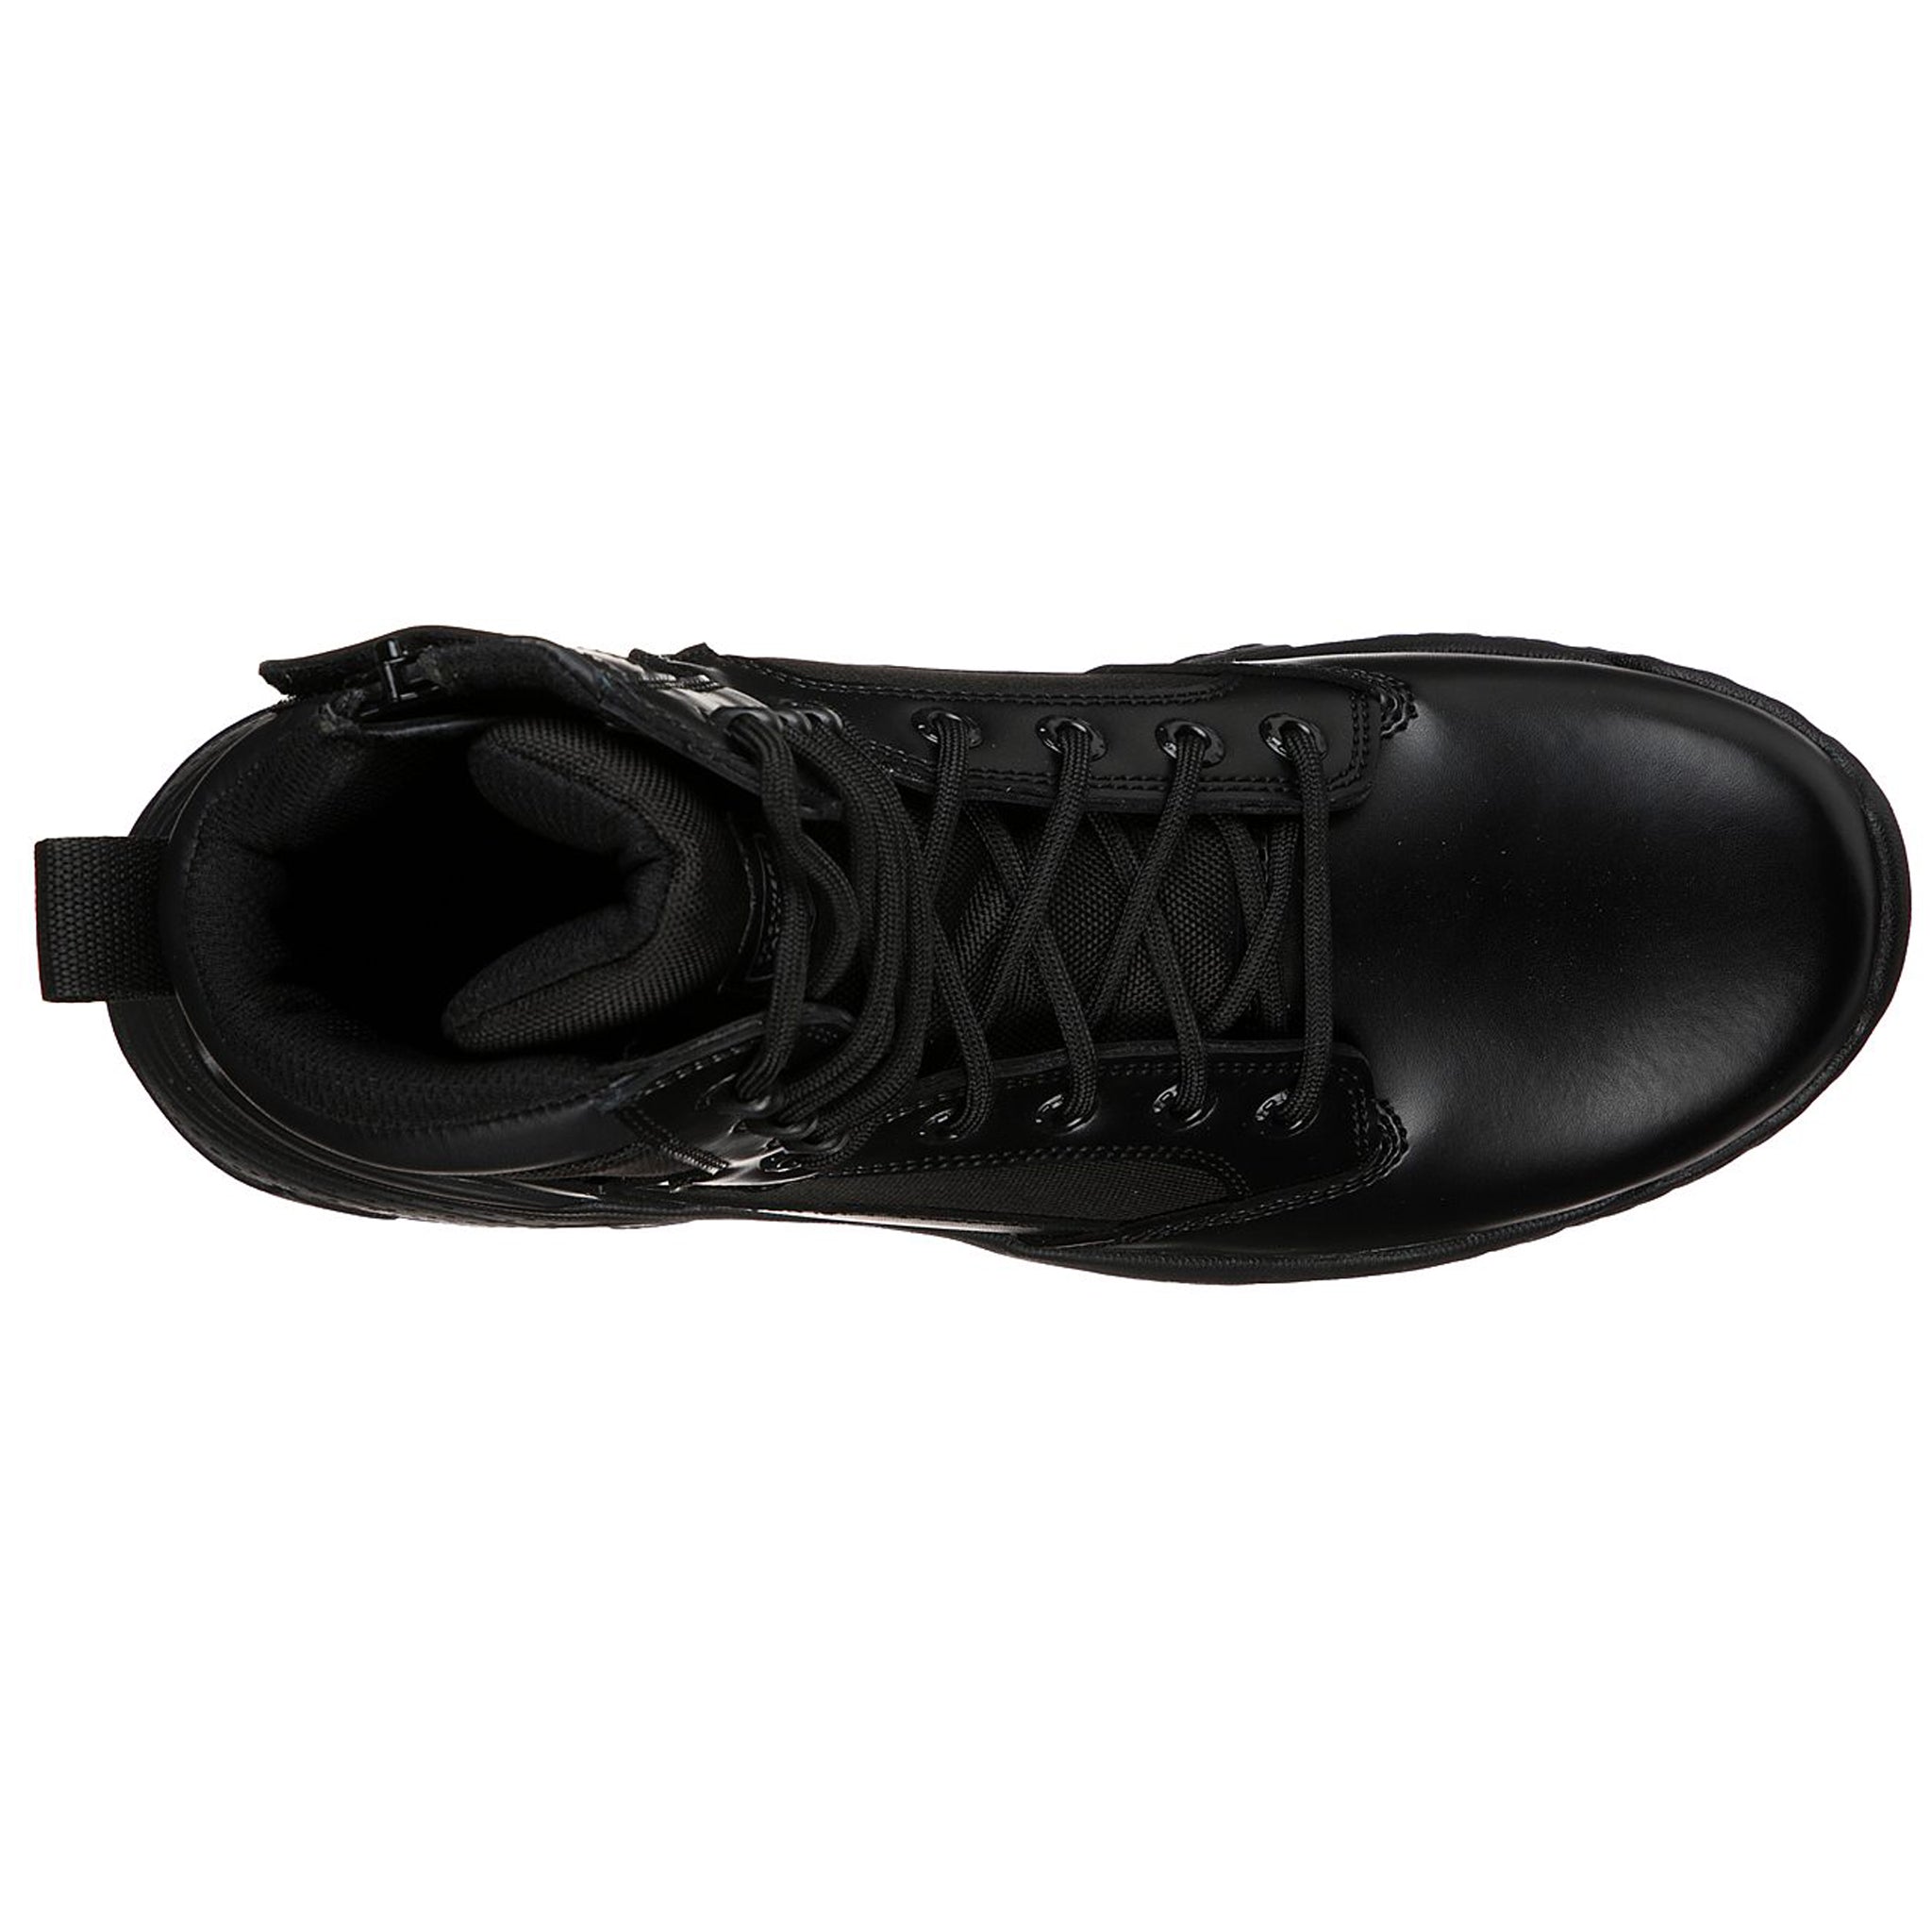 skechers tactical shoes